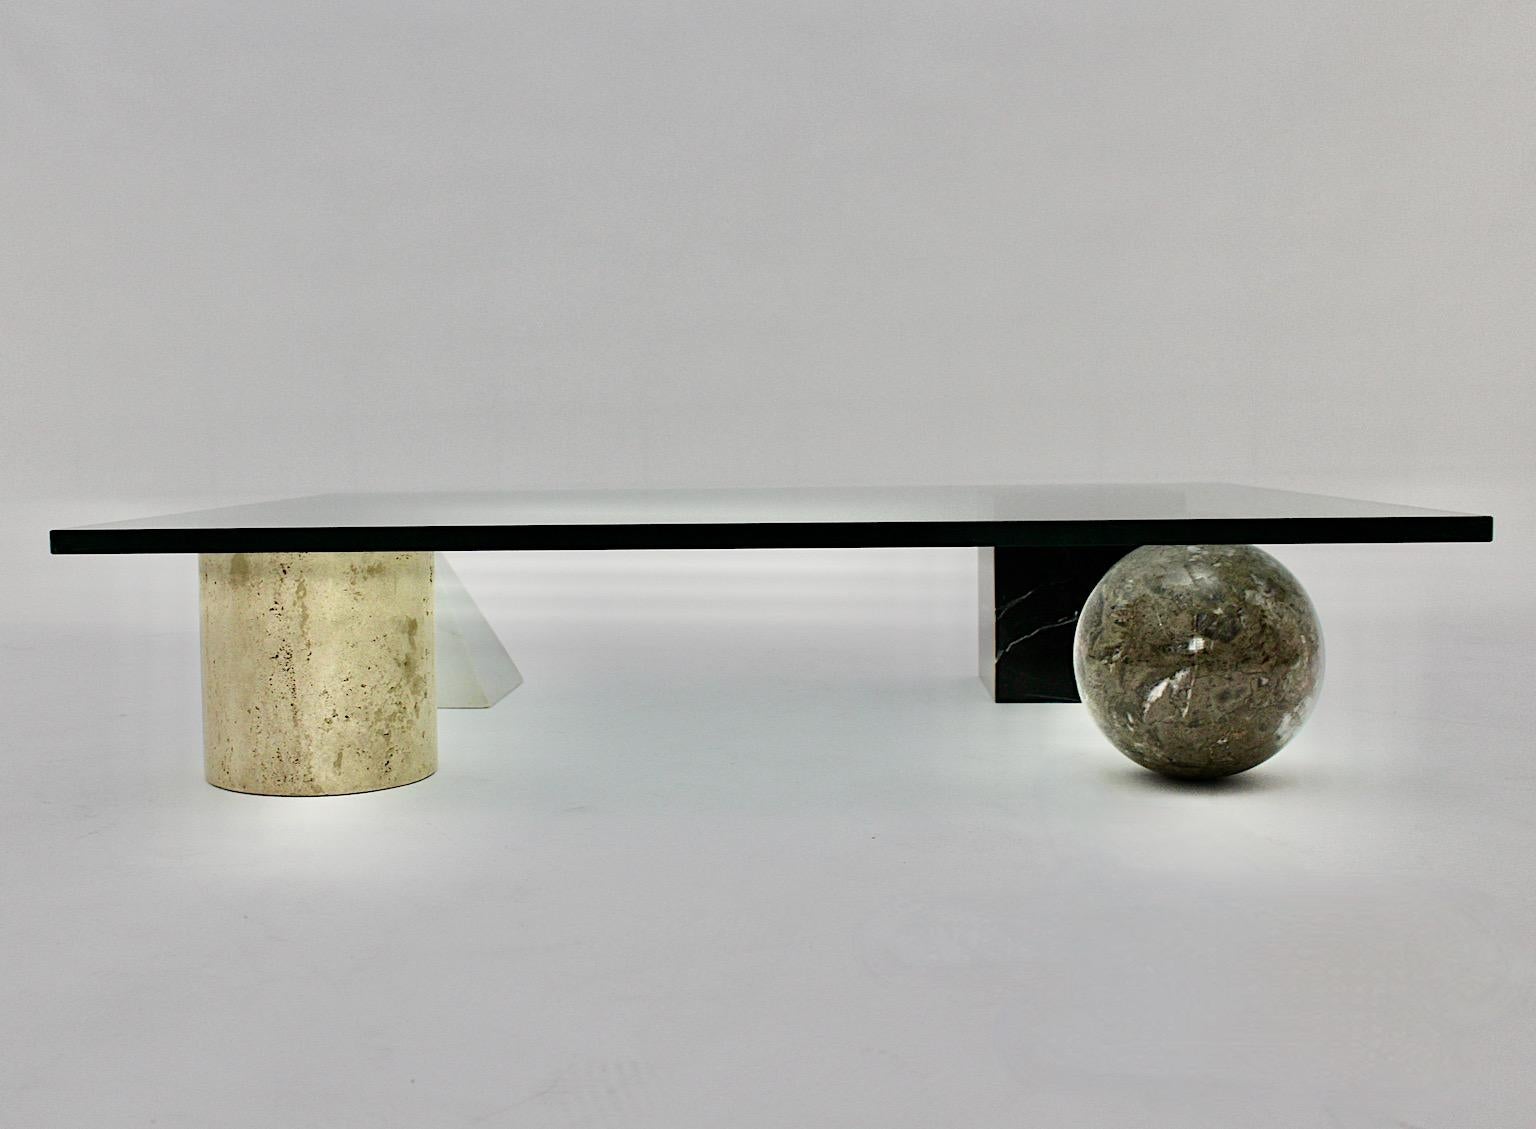 Modern vintage low sofa table or coffee table from marble, travertine and glass model Metafora by Massimo and Lella Vignelli 1970s Italy.
Iconic low sofa table composed of 4 geometric elements as feet from black marble rectangular element, white